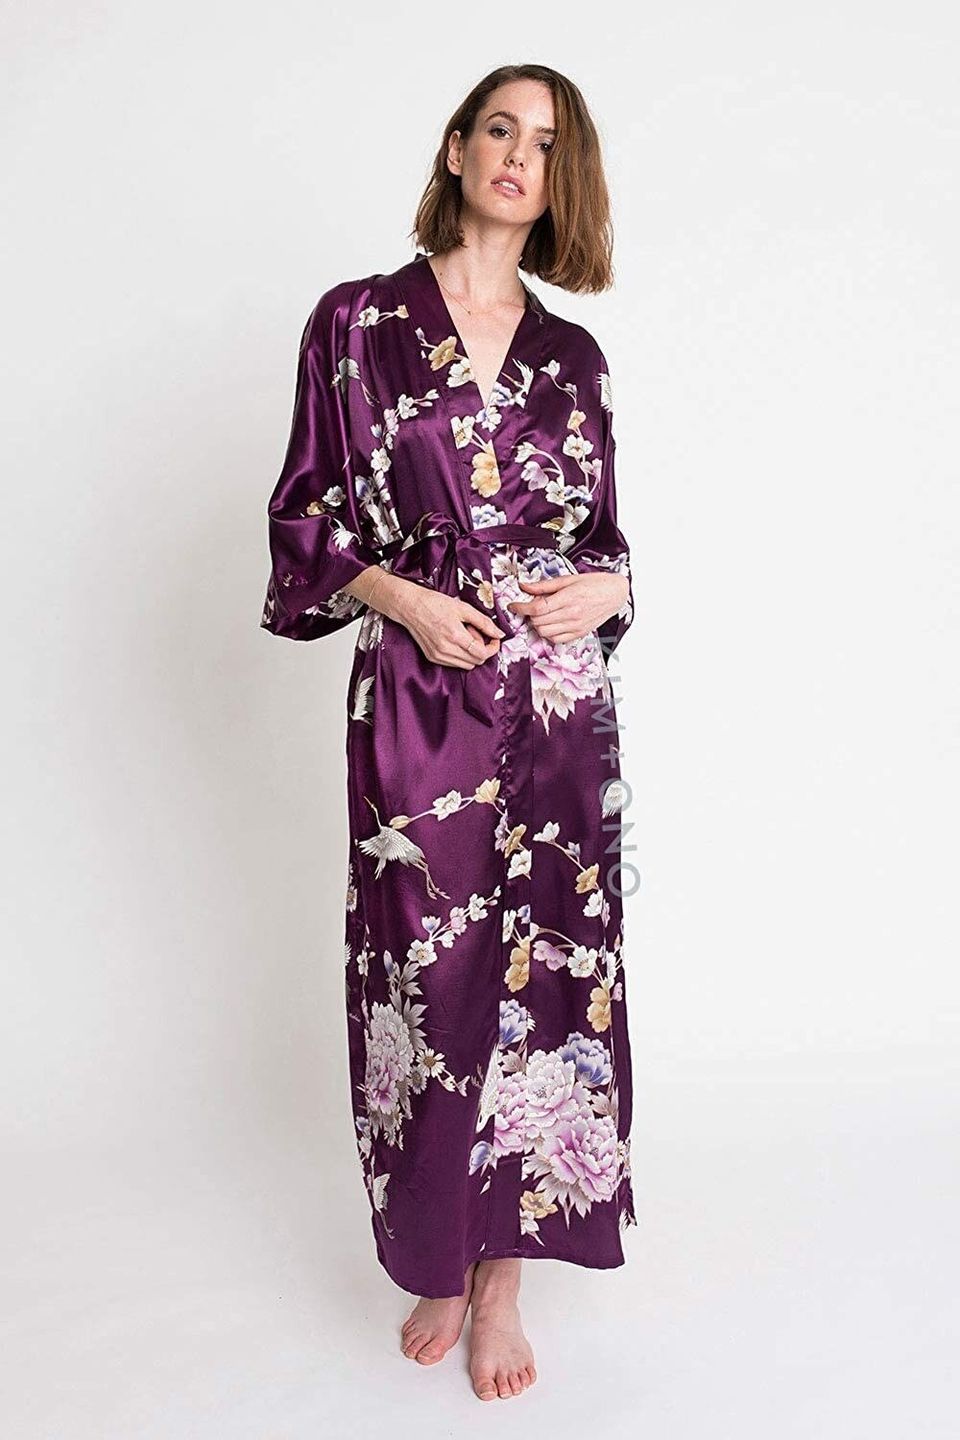 23 Pieces Of Loungewear That’ll Make You Feel Like Royalty | HuffPost Life